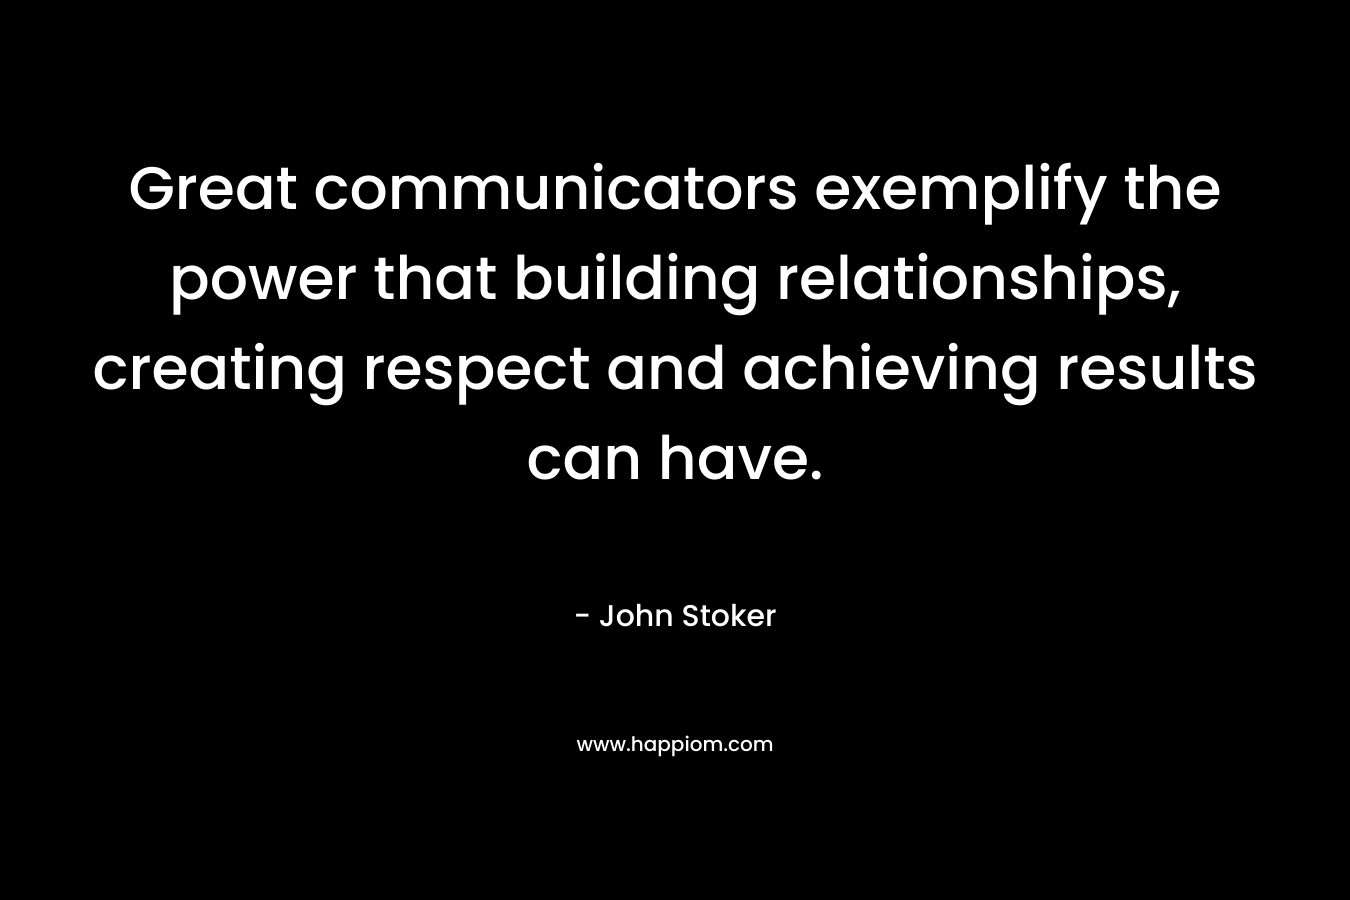 Great communicators exemplify the power that building relationships, creating respect and achieving results can have. – John Stoker